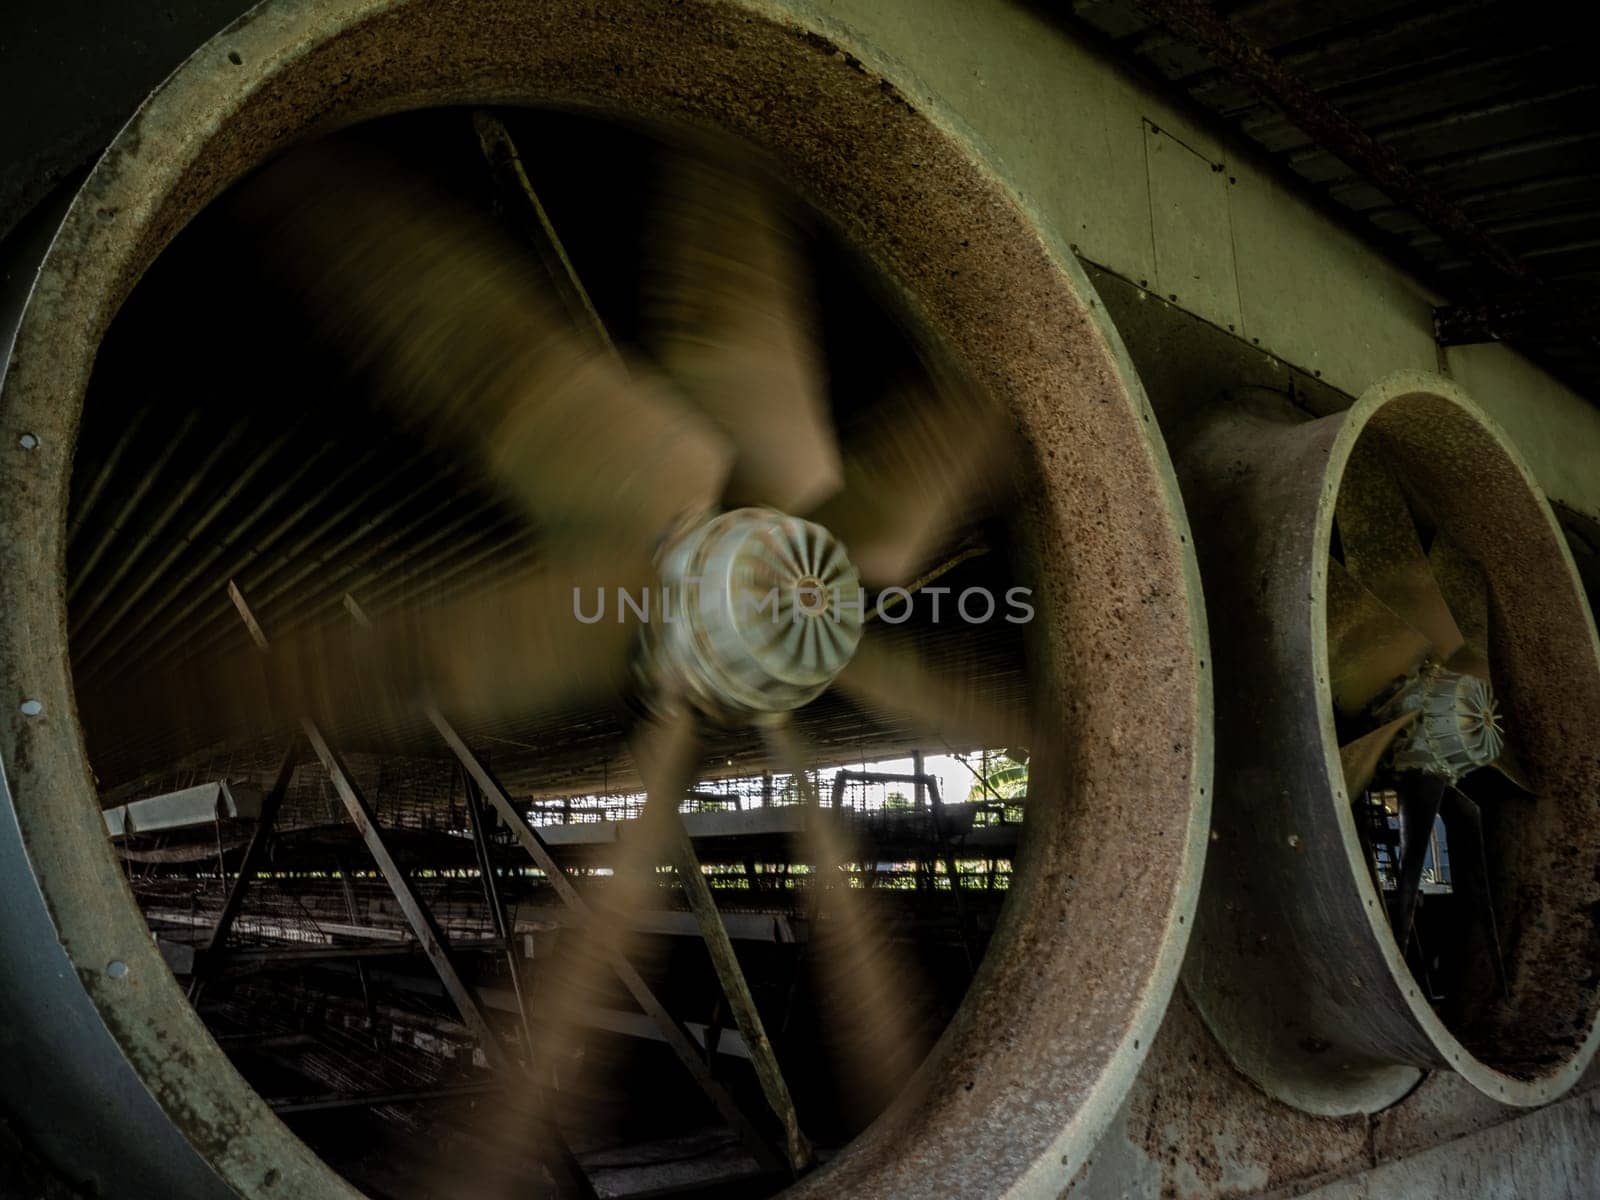 looking inside the livestock house through the space of the exhaust fan blade by Satakorn